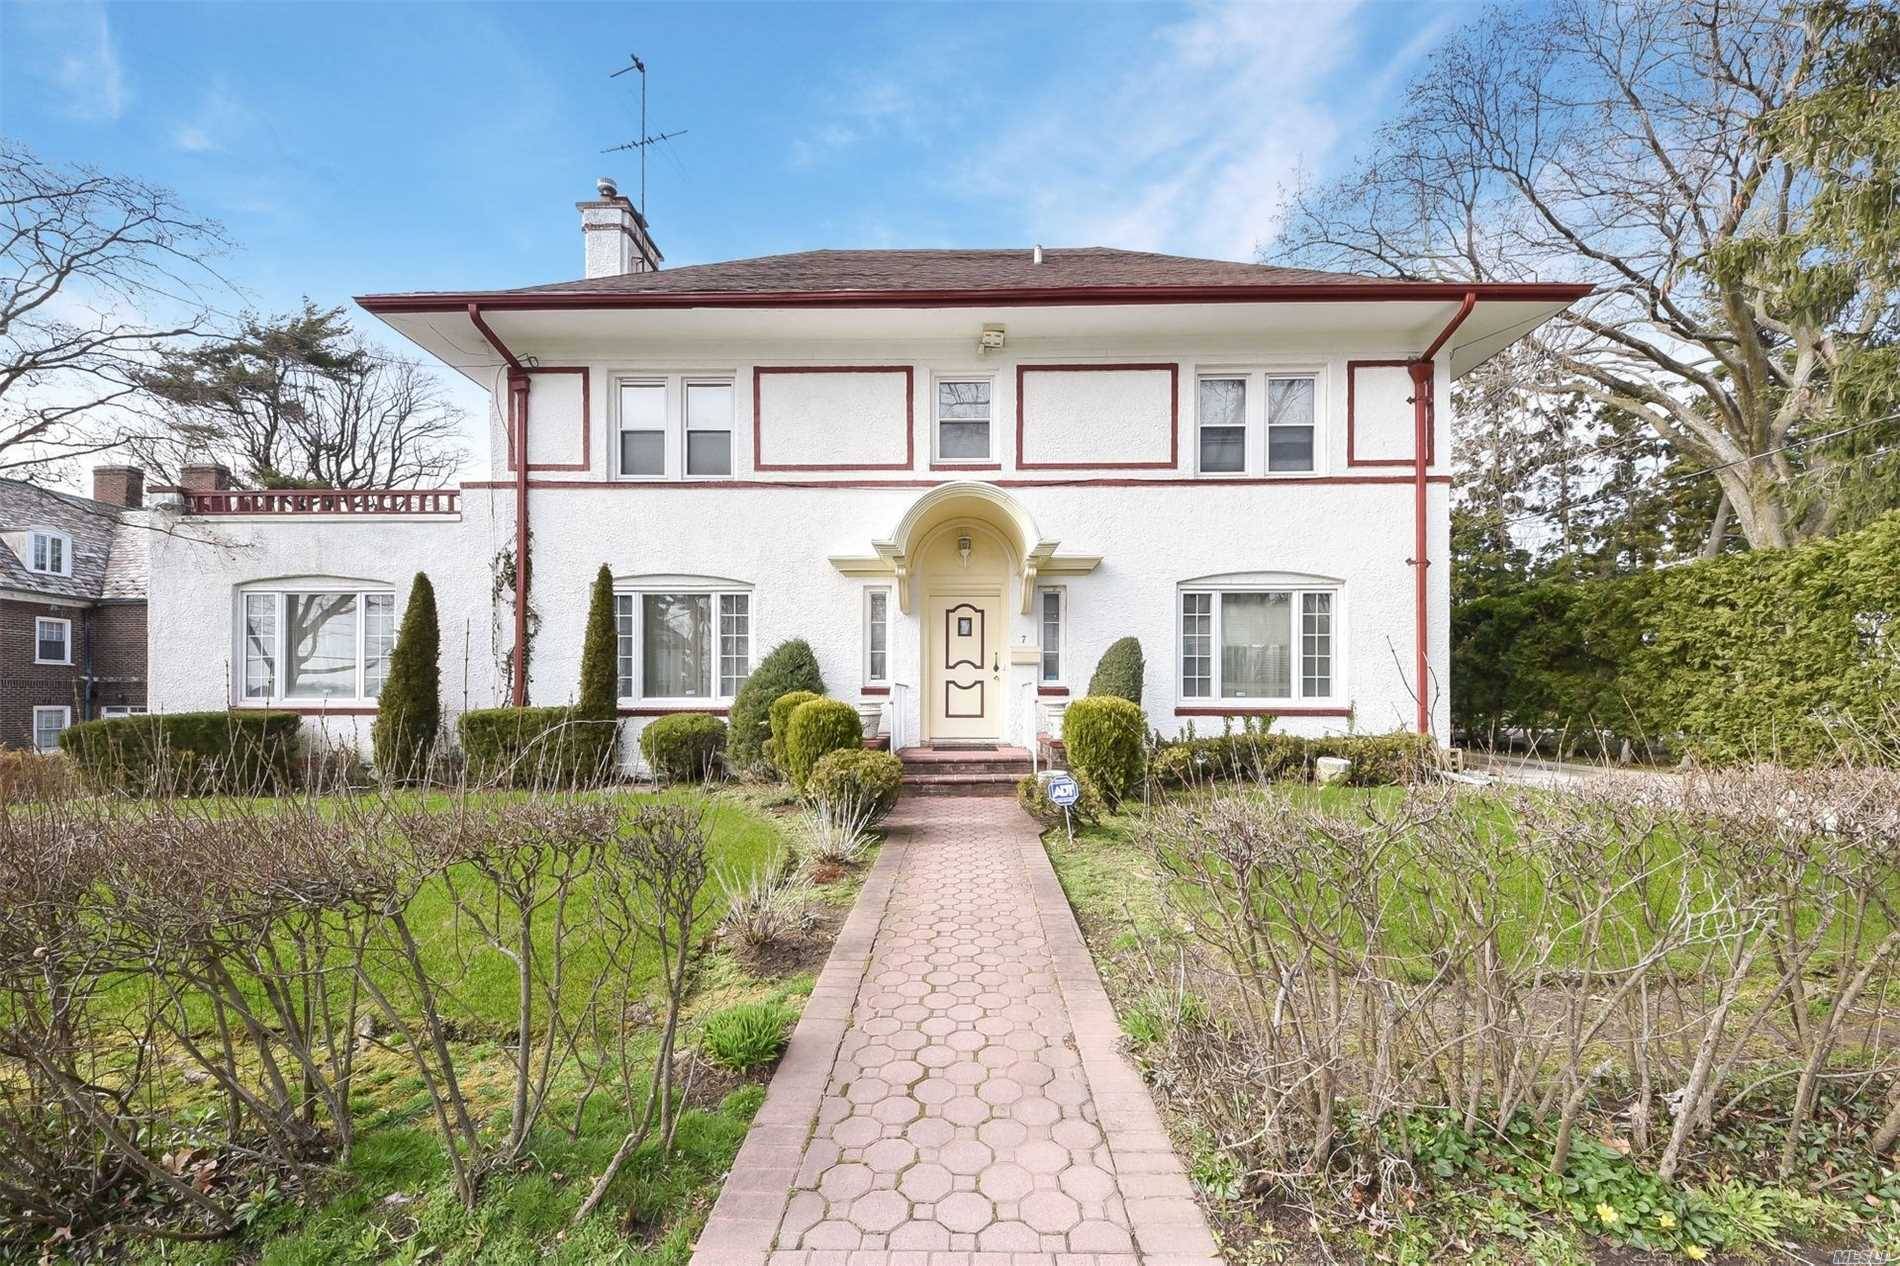 Prime Douglaston Manor With Water Views From Both Floors Overlooking Little Neck Bay.